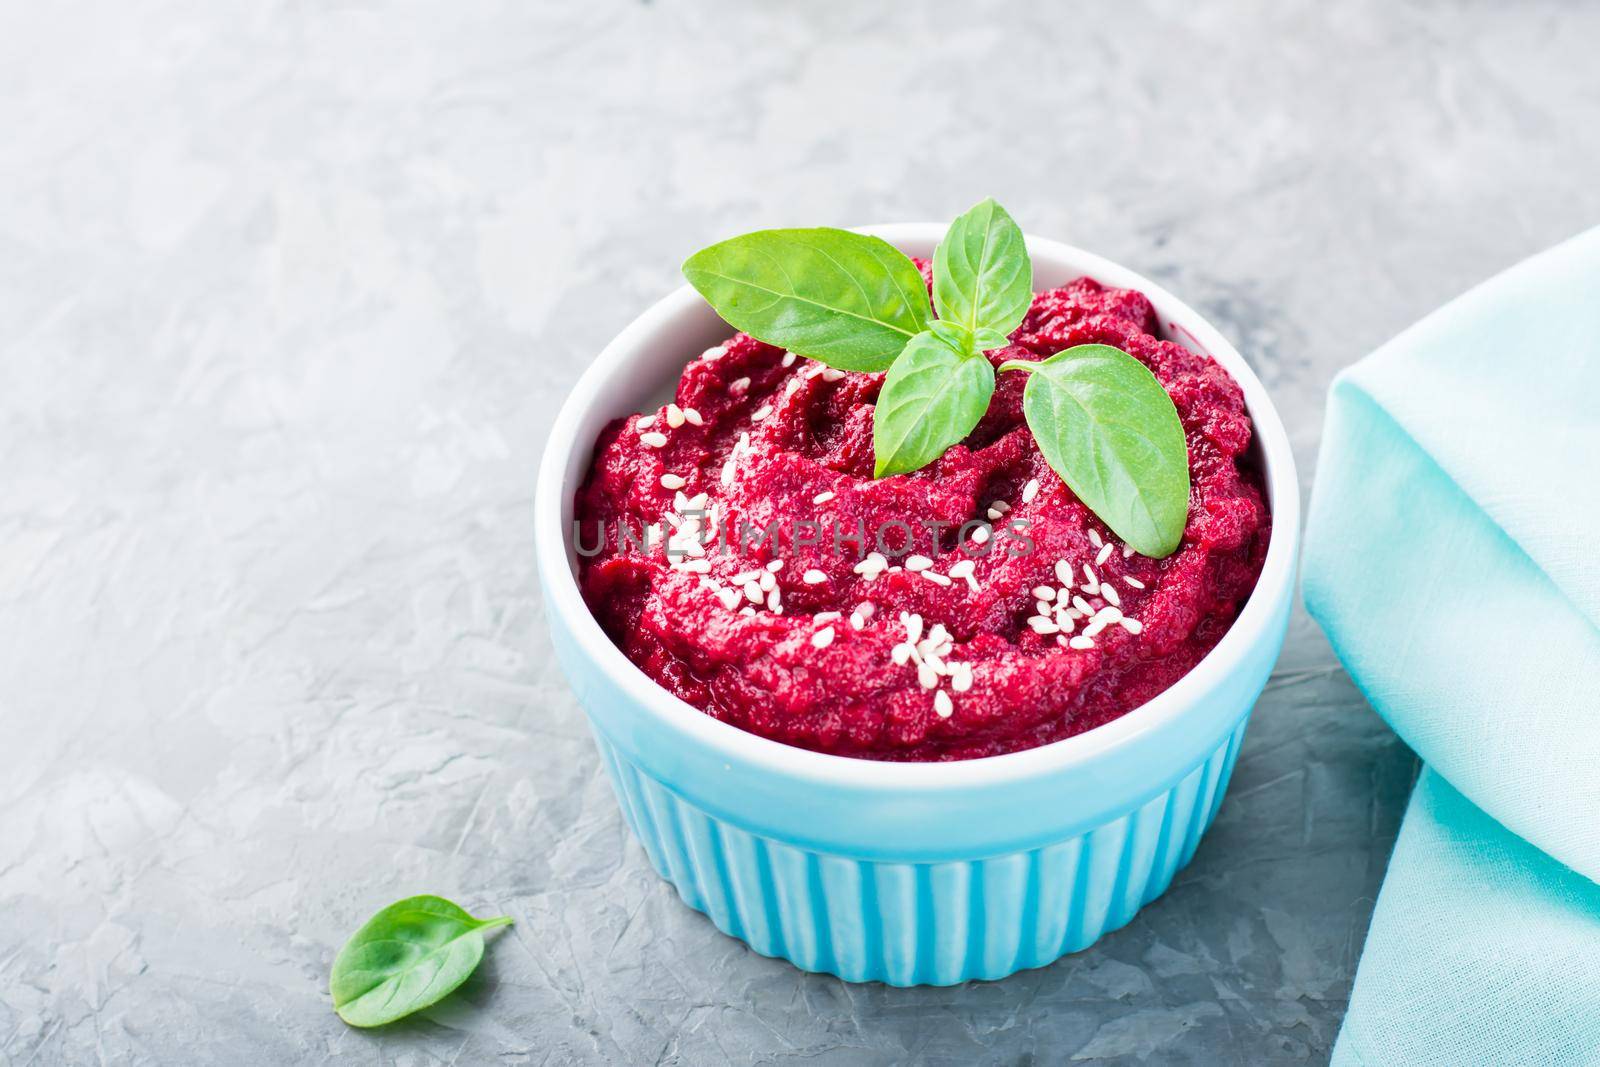 Homemade baked beetroot hummus in a bowl with sesame seeds and basil on the table. Close-up